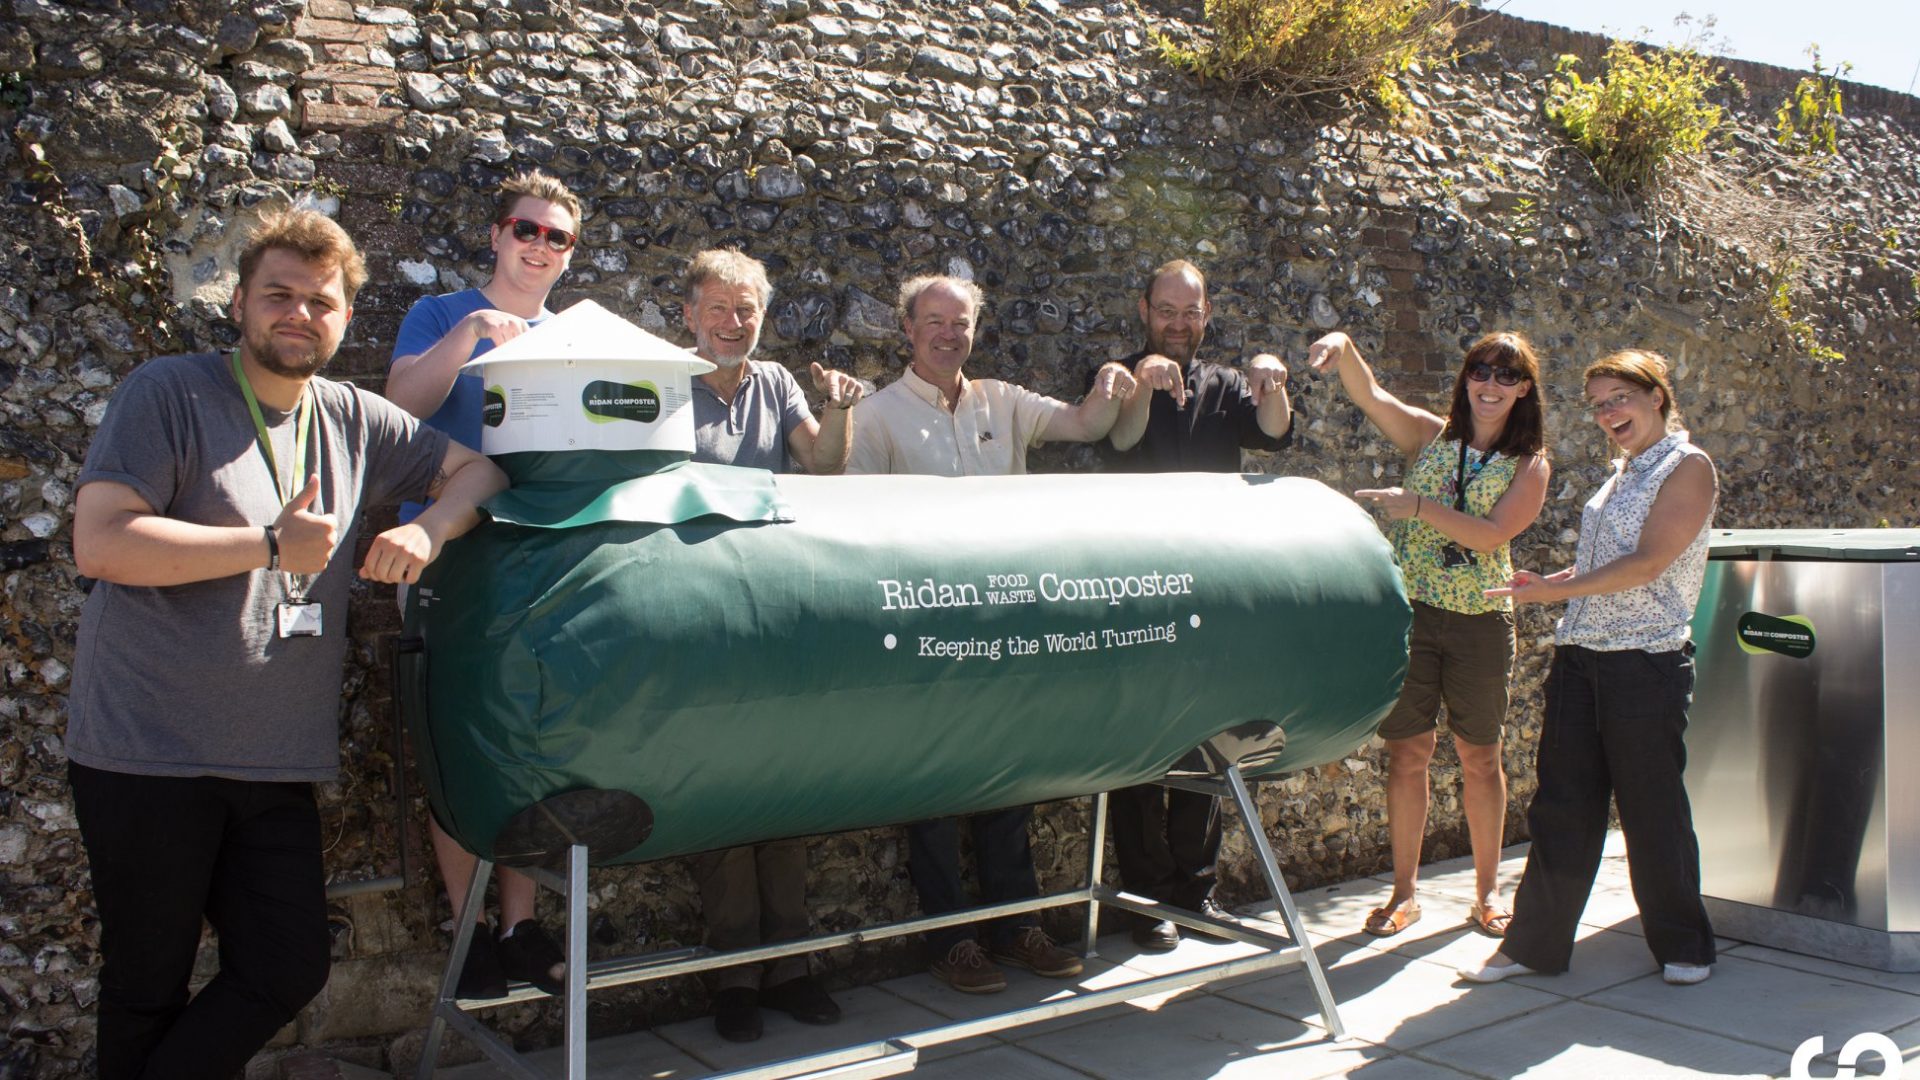 group of people stood around a Ridan composting machine